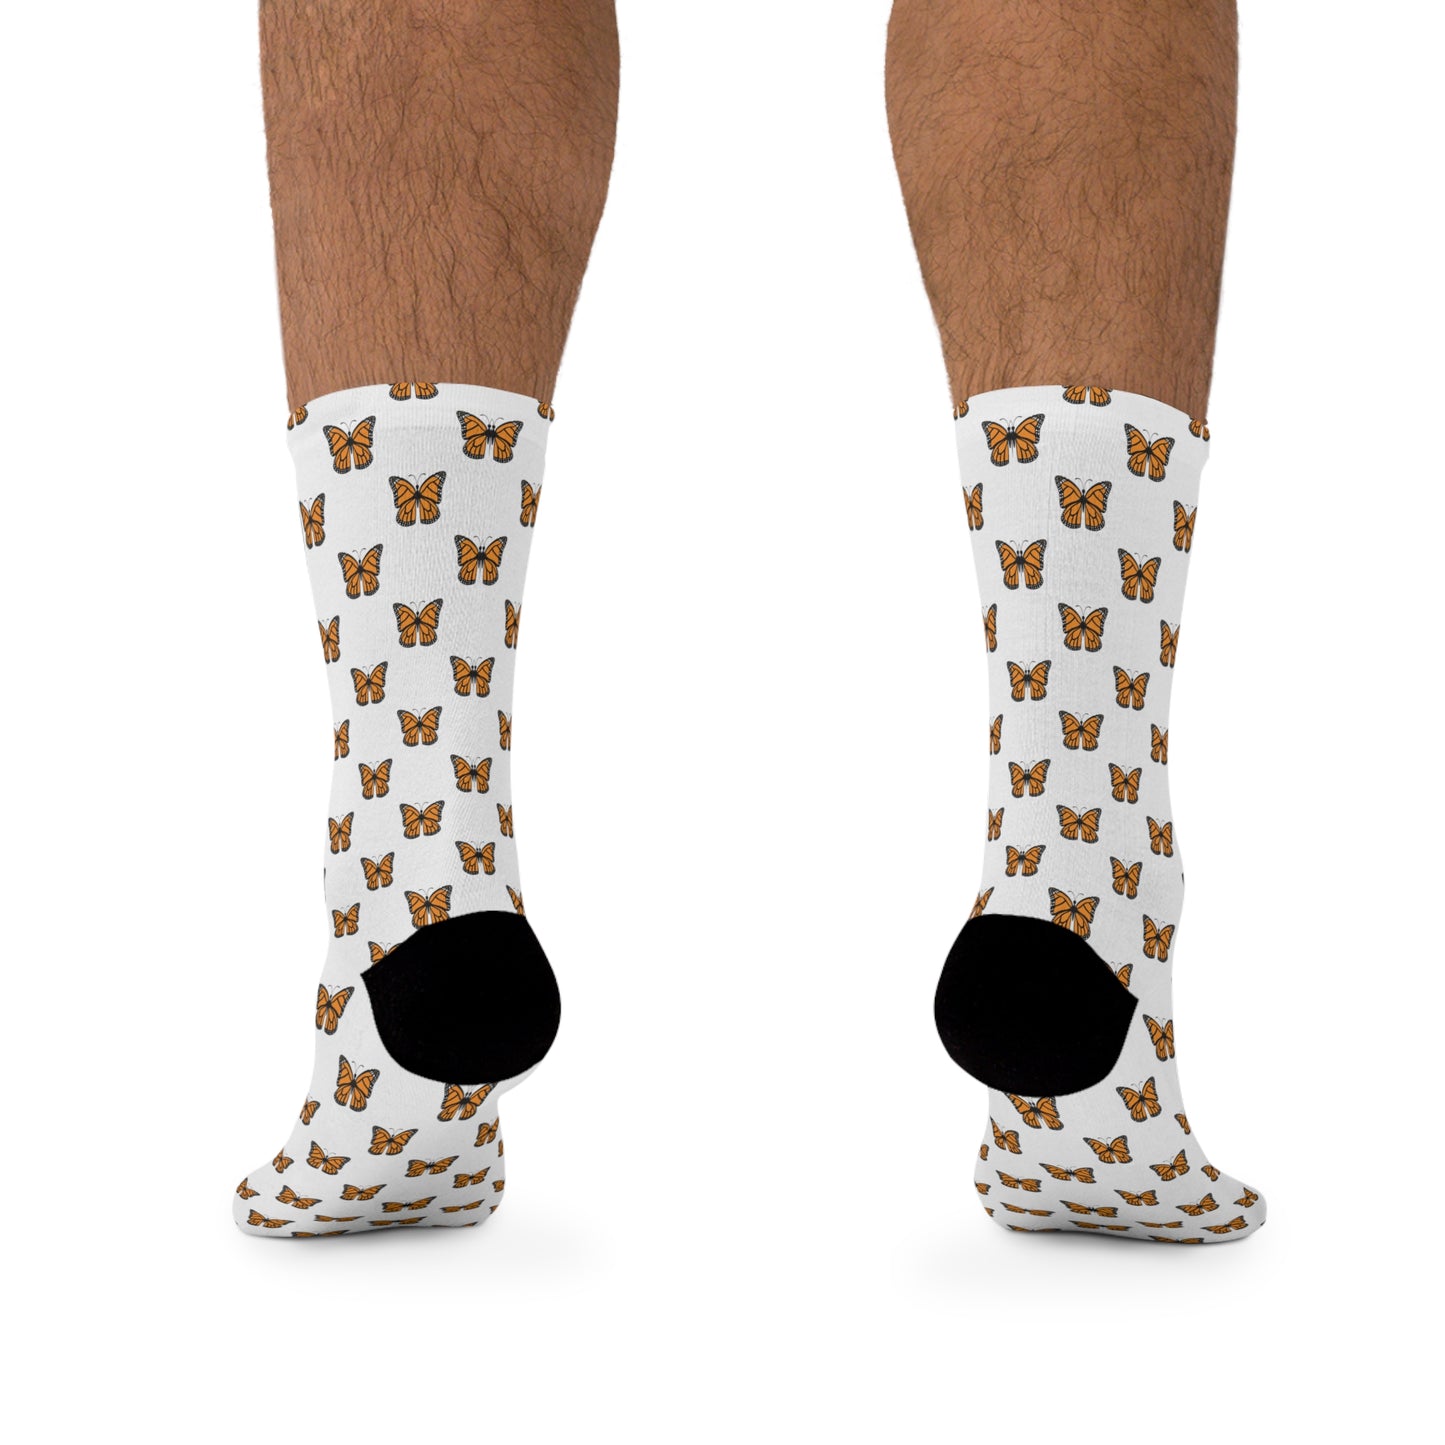 Monarch Butterfly Pattern Recycled Poly Socks: A Stylish and Eco-Friendly Choice